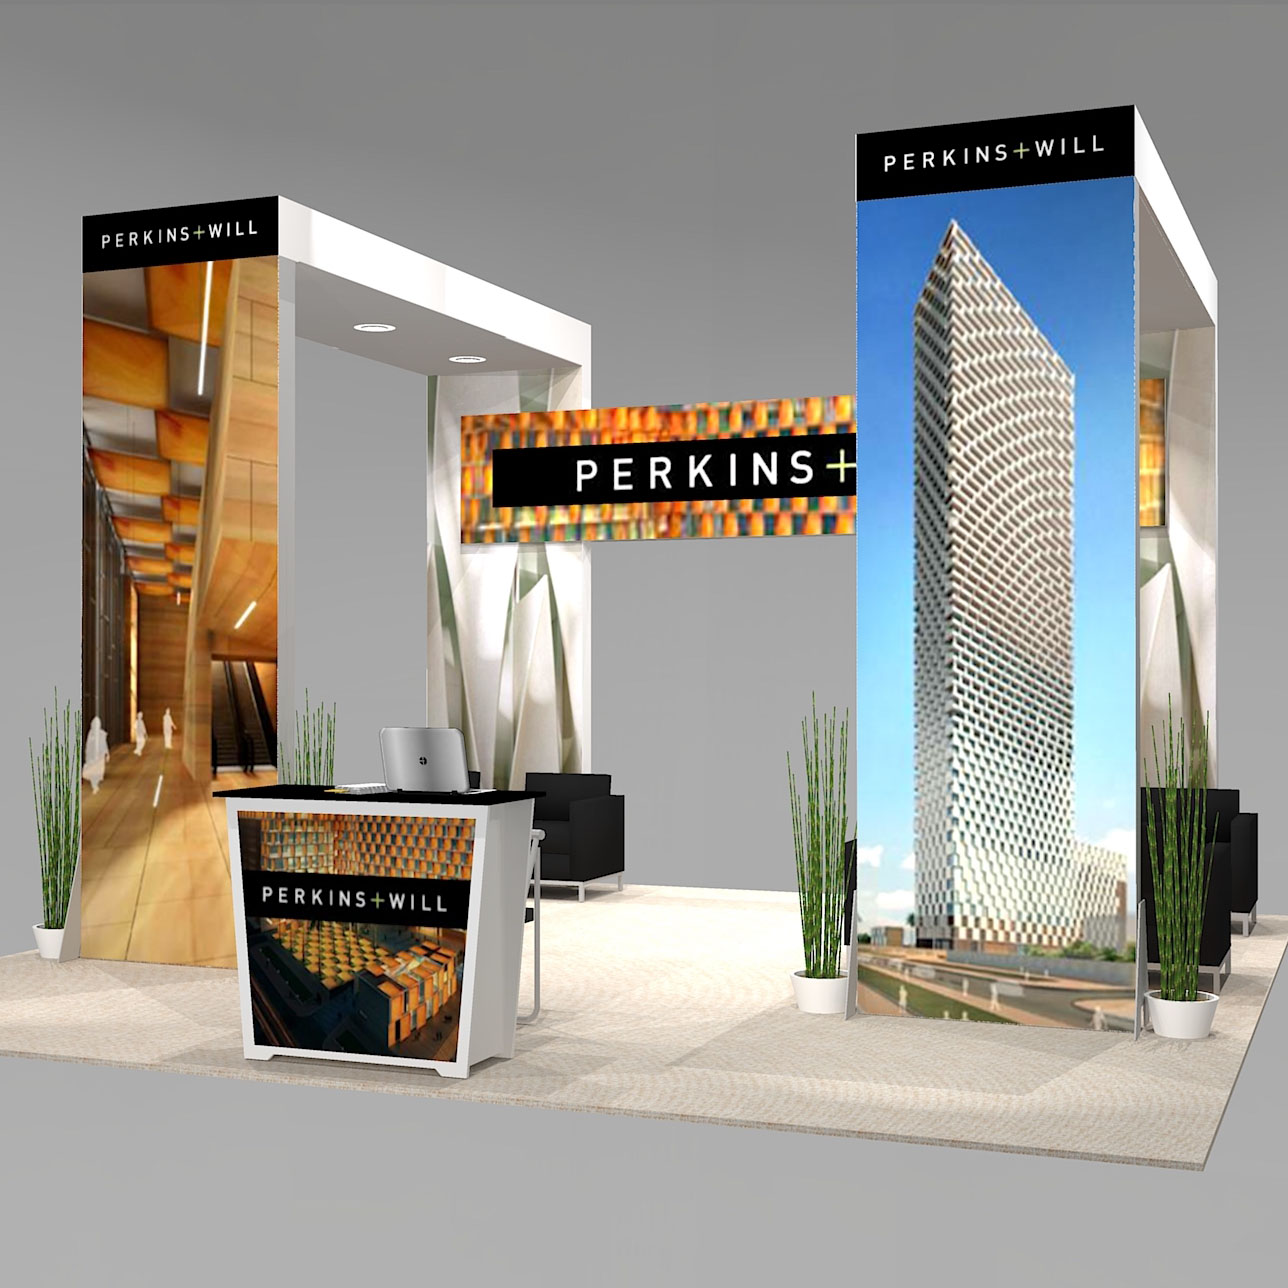 New-design-for-Island-trade-show-booth-spaces